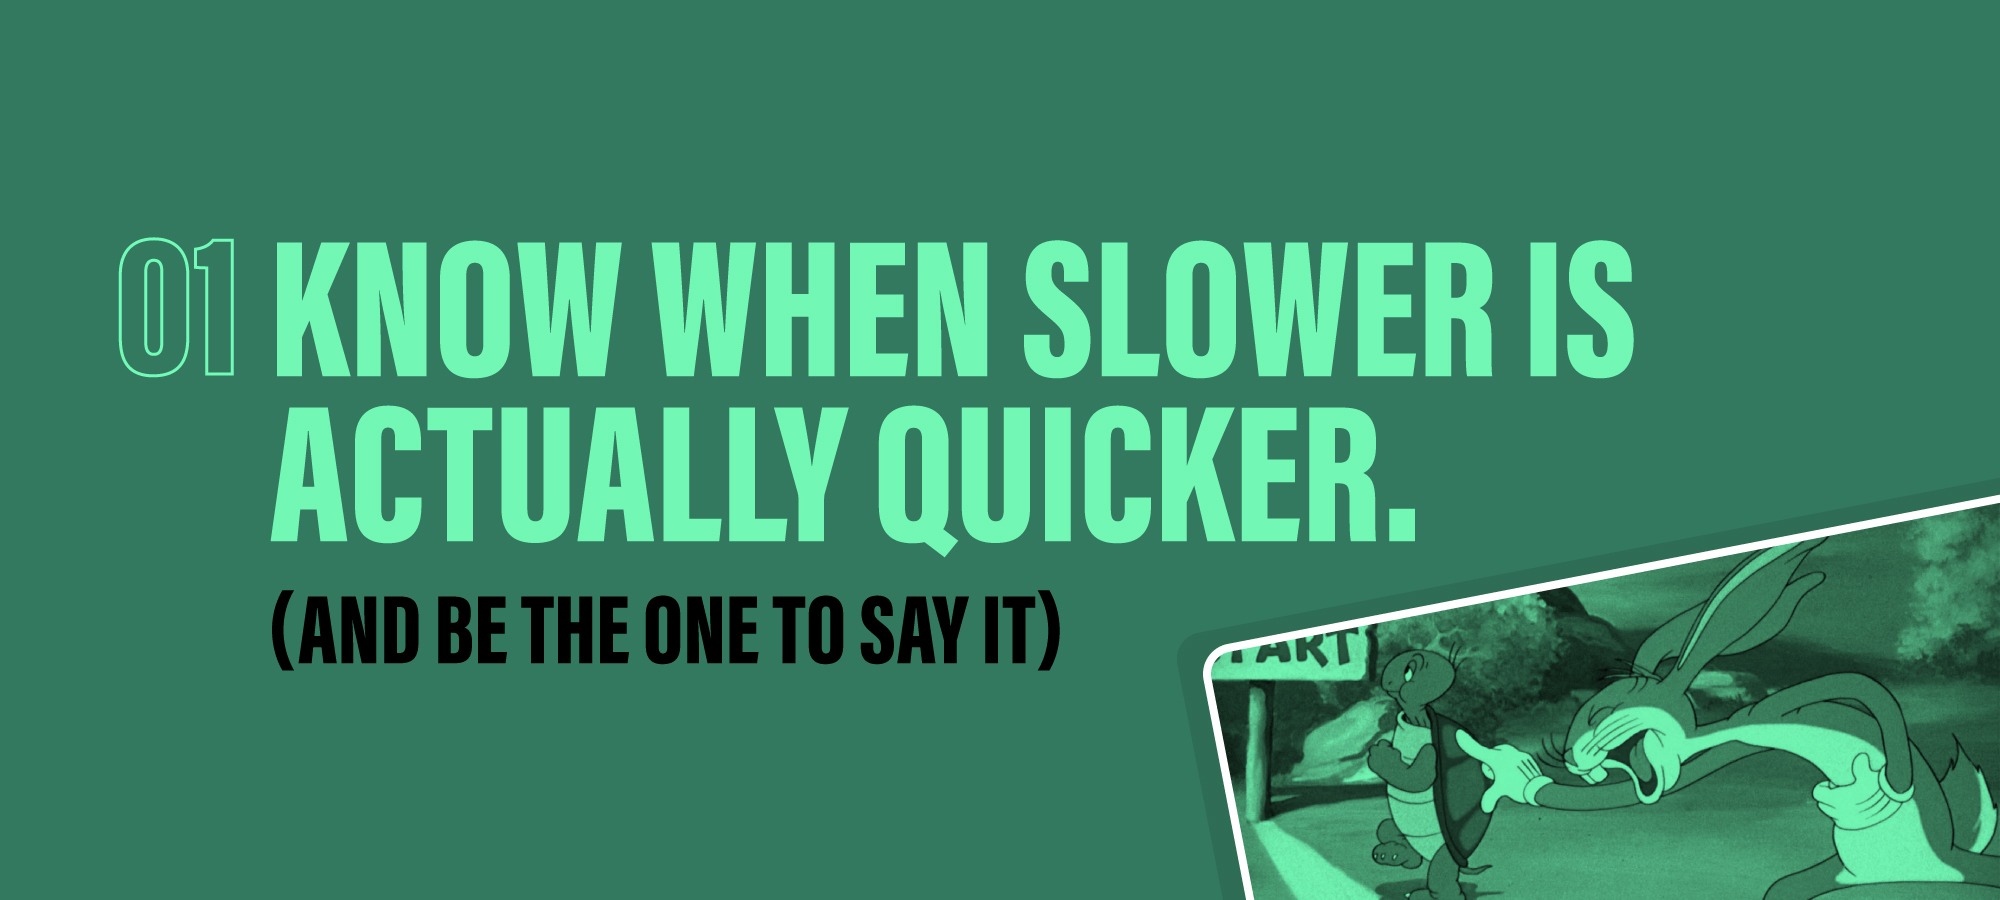 Know when slower is actually quicker (And be the one to say it)